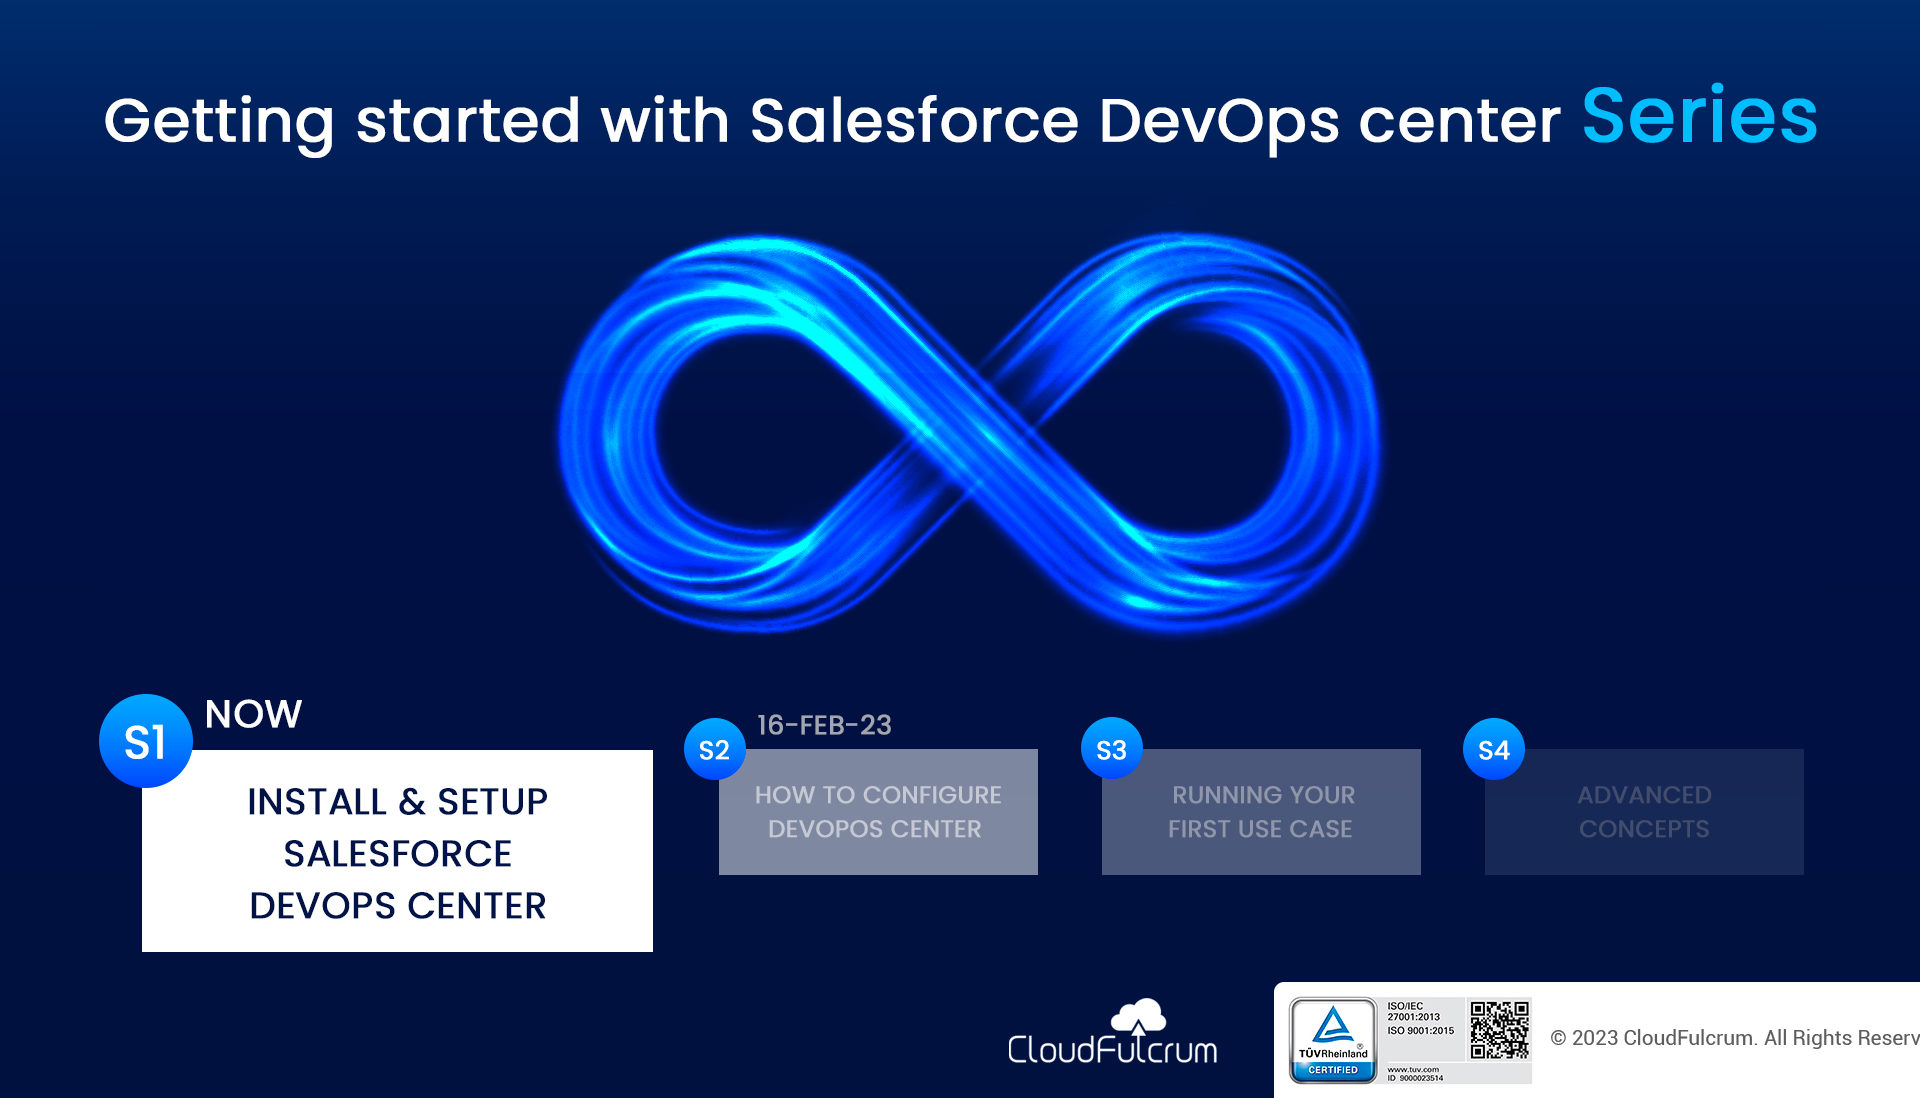 Getting Started with Salesforce DevOps Center Series